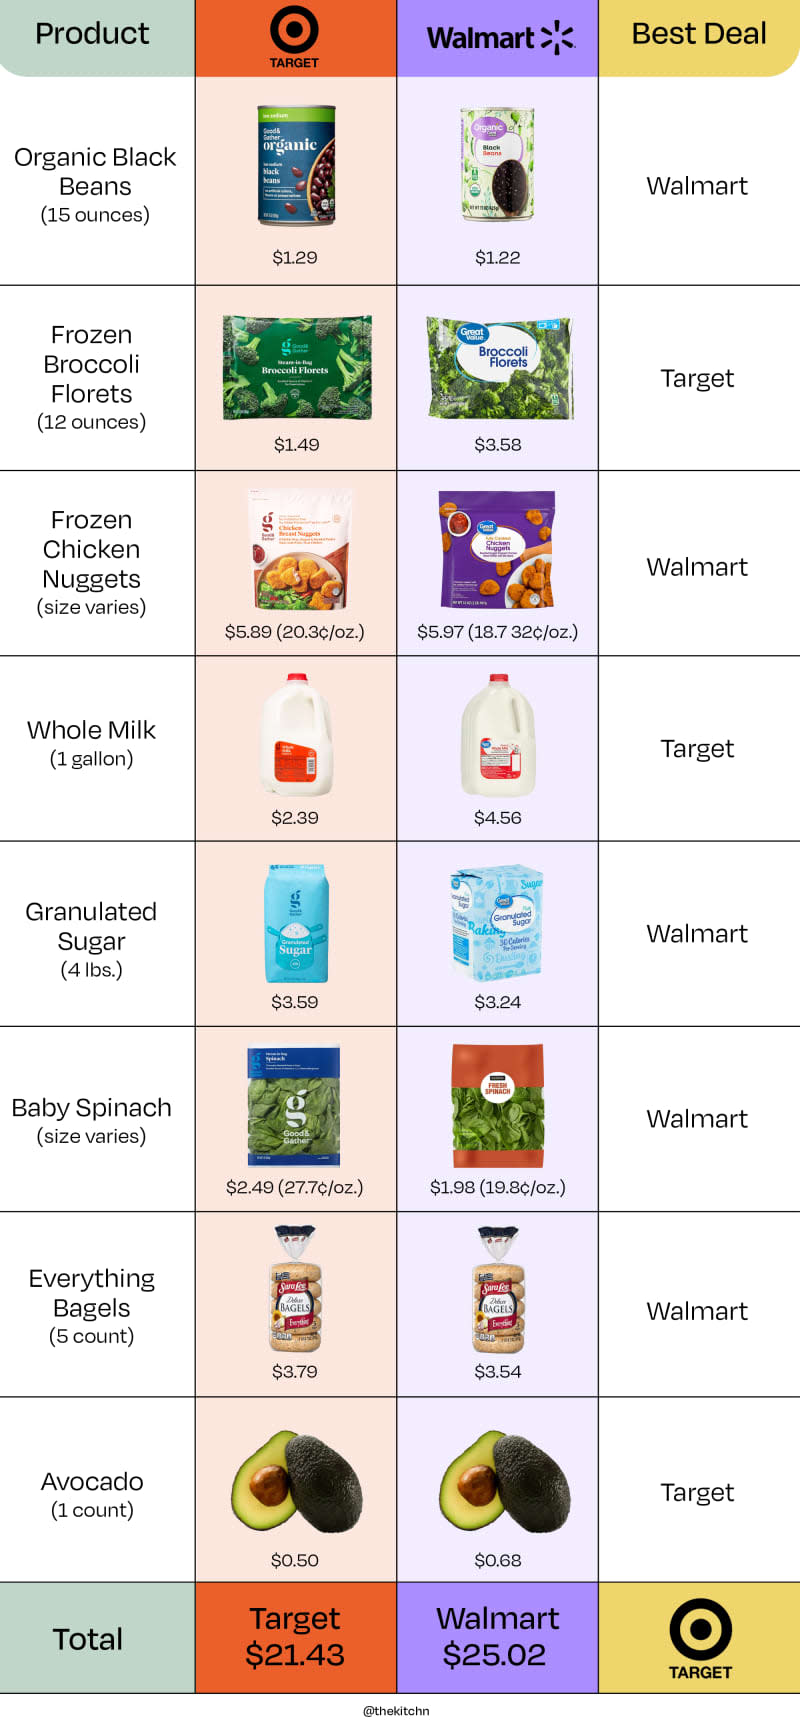 comparison of products at walmart vs target